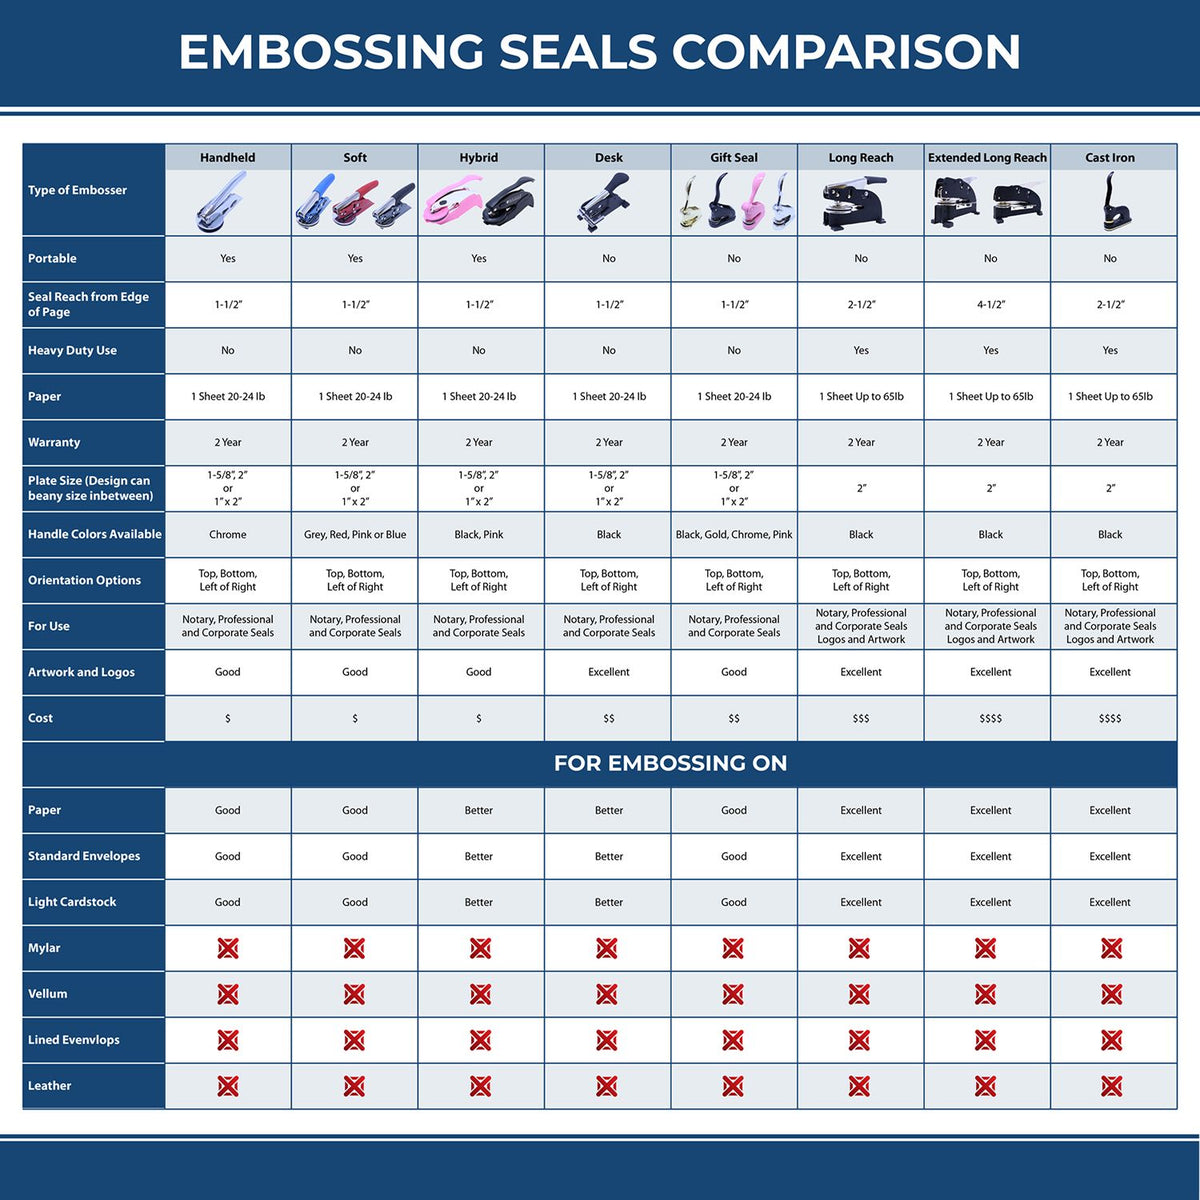 A comparison chart for the different types of mount models available for the Handheld Connecticut Professional Geologist Embosser